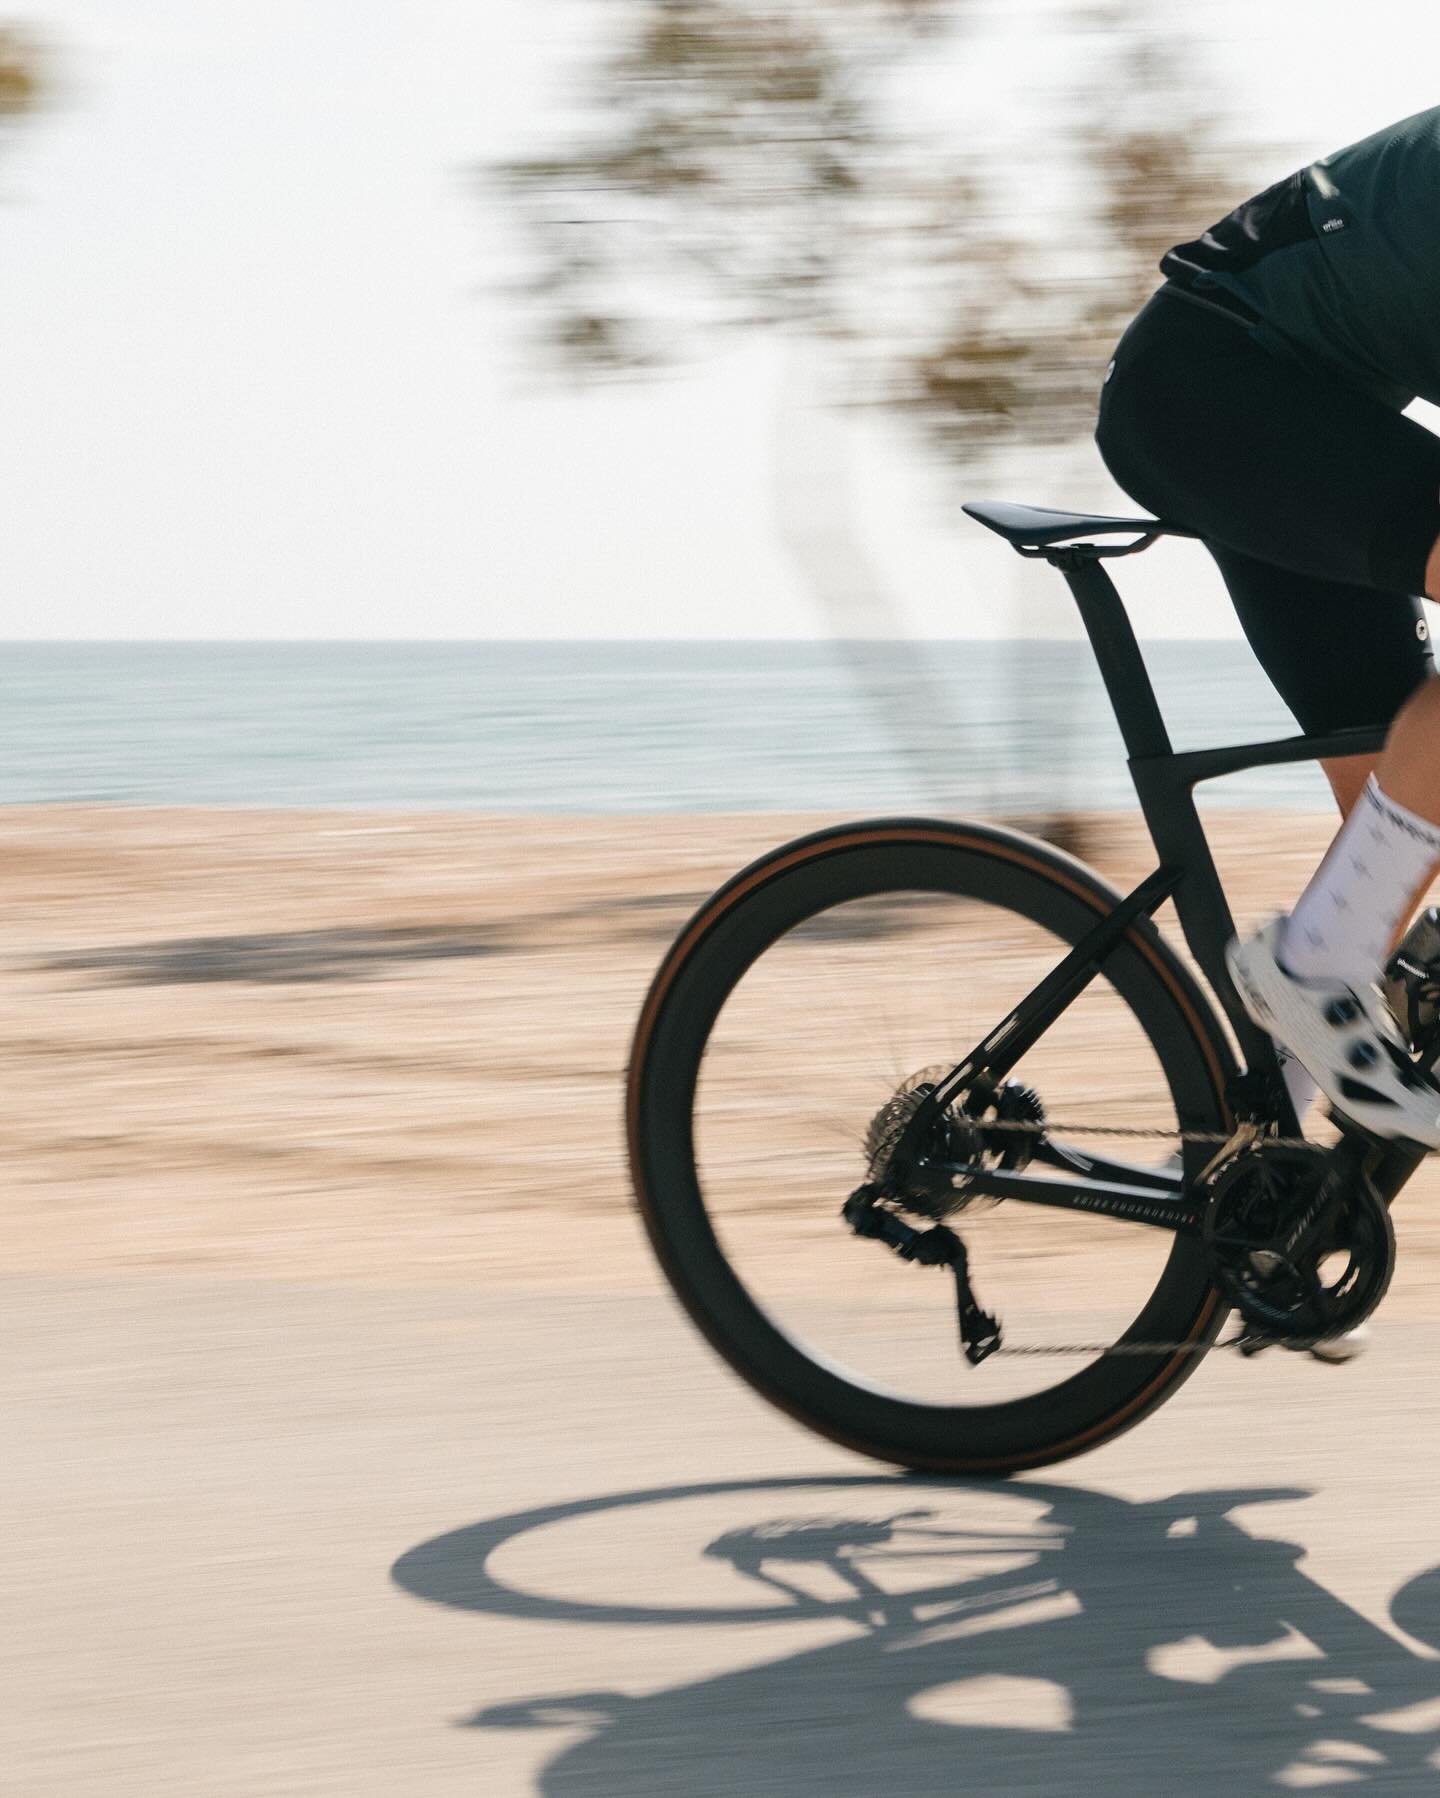 phenum&reg; 

Our fastest raw carbon material for the asphalt. Like a jet plane, it flies low over the road.
Uncompromisingly forward - the limit are your legs.

Full powered with all our components a awesome C10R machine.

phenum C10R raw carbon

#p